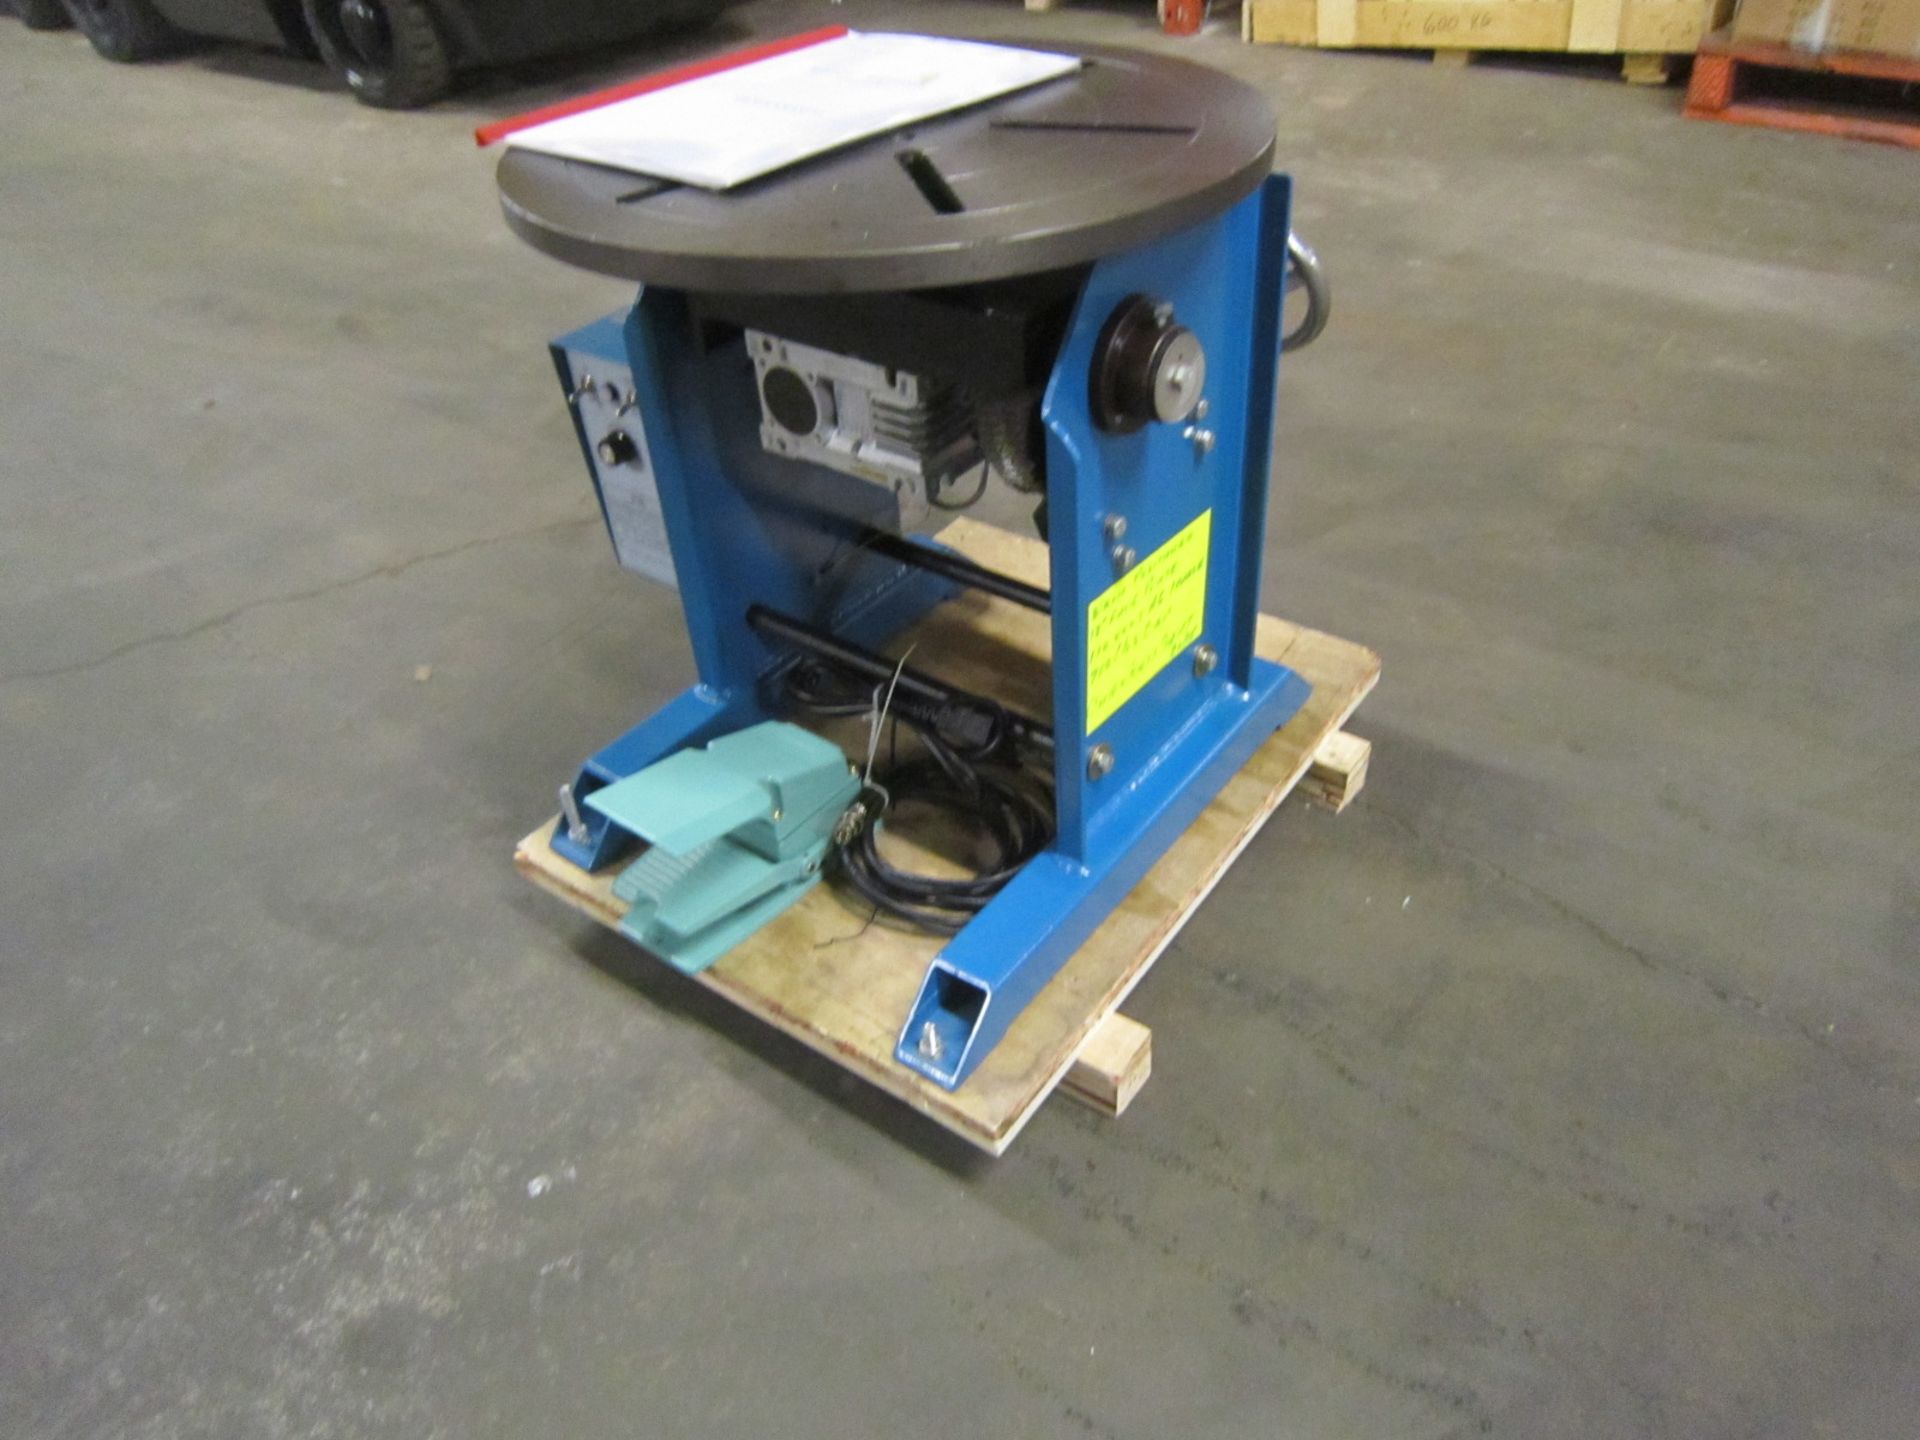 Verner model VD-700 WELDING POSITIONER 700lbs capacity - tilt and rotate with variable speed drive